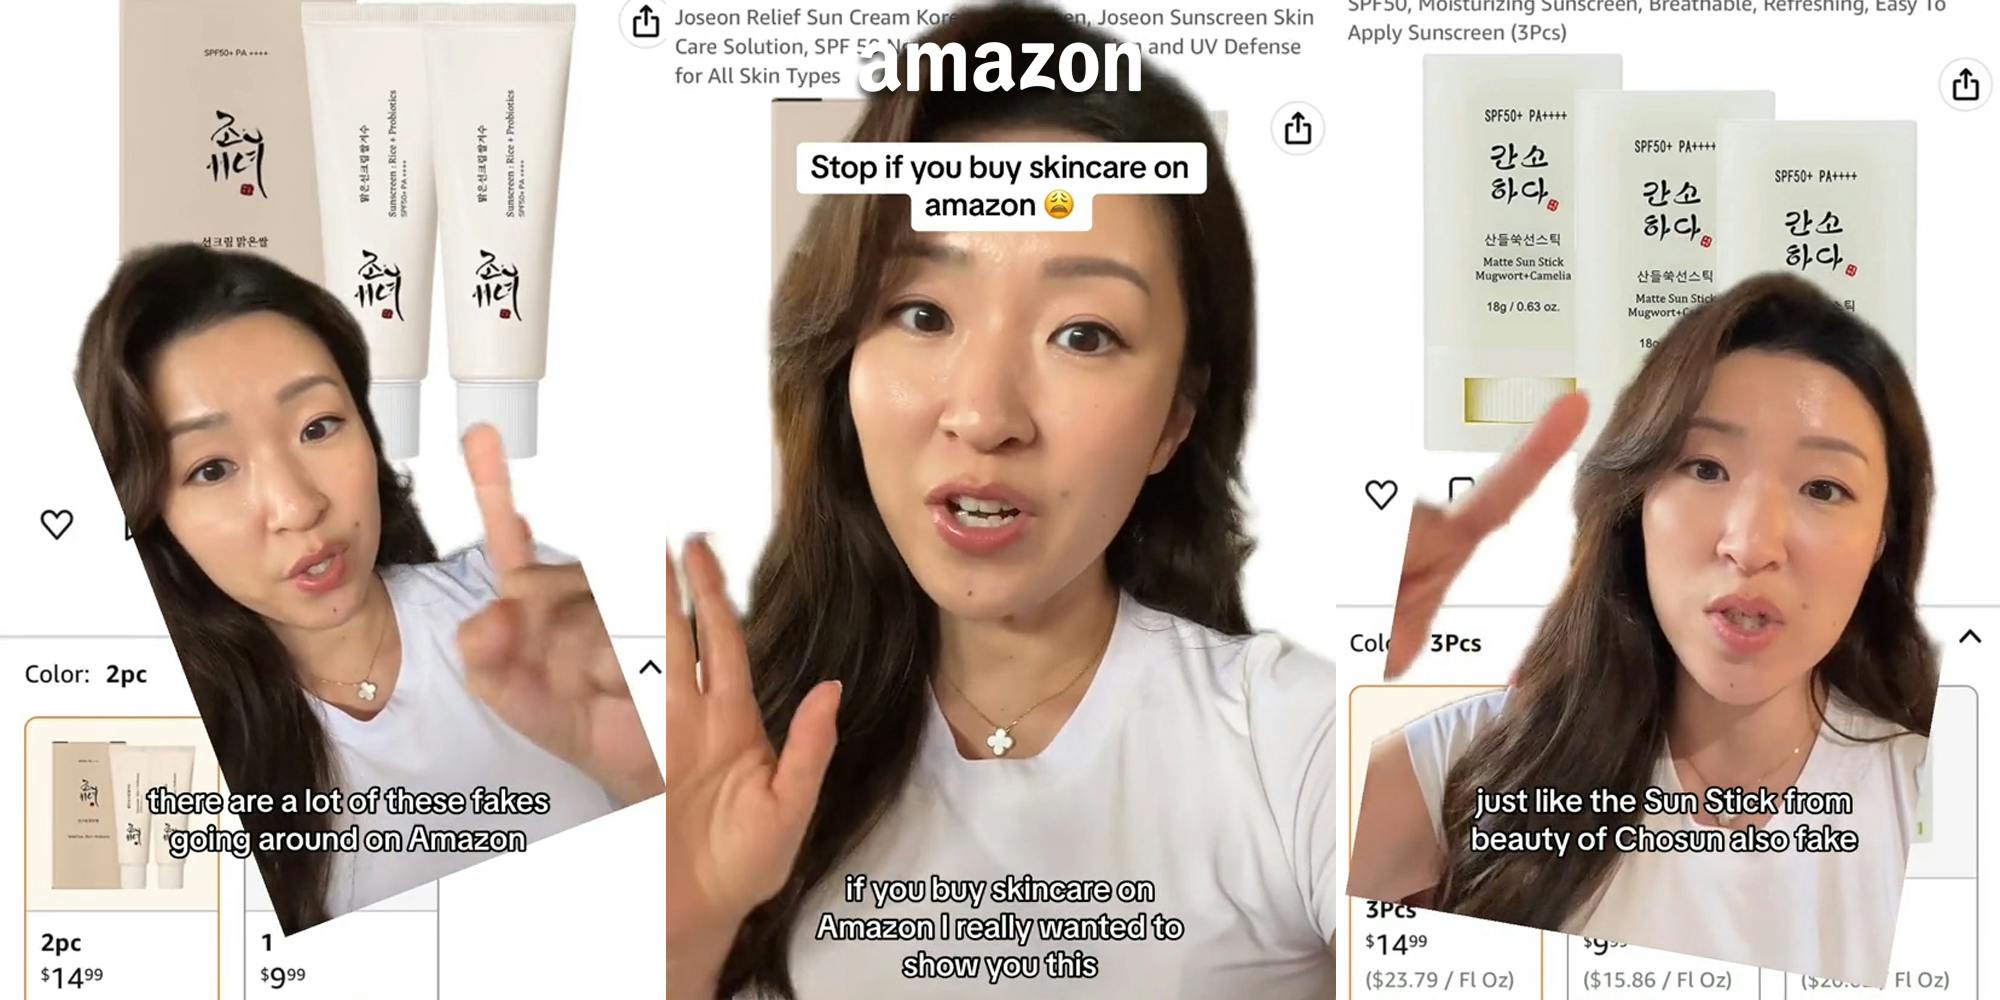 woman greenscreen TikTok over Amazon beauty products with caption "there are a lot of these fakes going around on Amazon" (l) woman greenscreen TikTok over Amazon beauty products with caption "Stop if you buy skincare on amazon if you buy skincare on Amazon I really wanted to show you this" with Amazon logo above (c) woman greenscreen TikTok over Amazon beauty products with caption "just like the Sun Stick from beauty of Chosun also fake" (r)